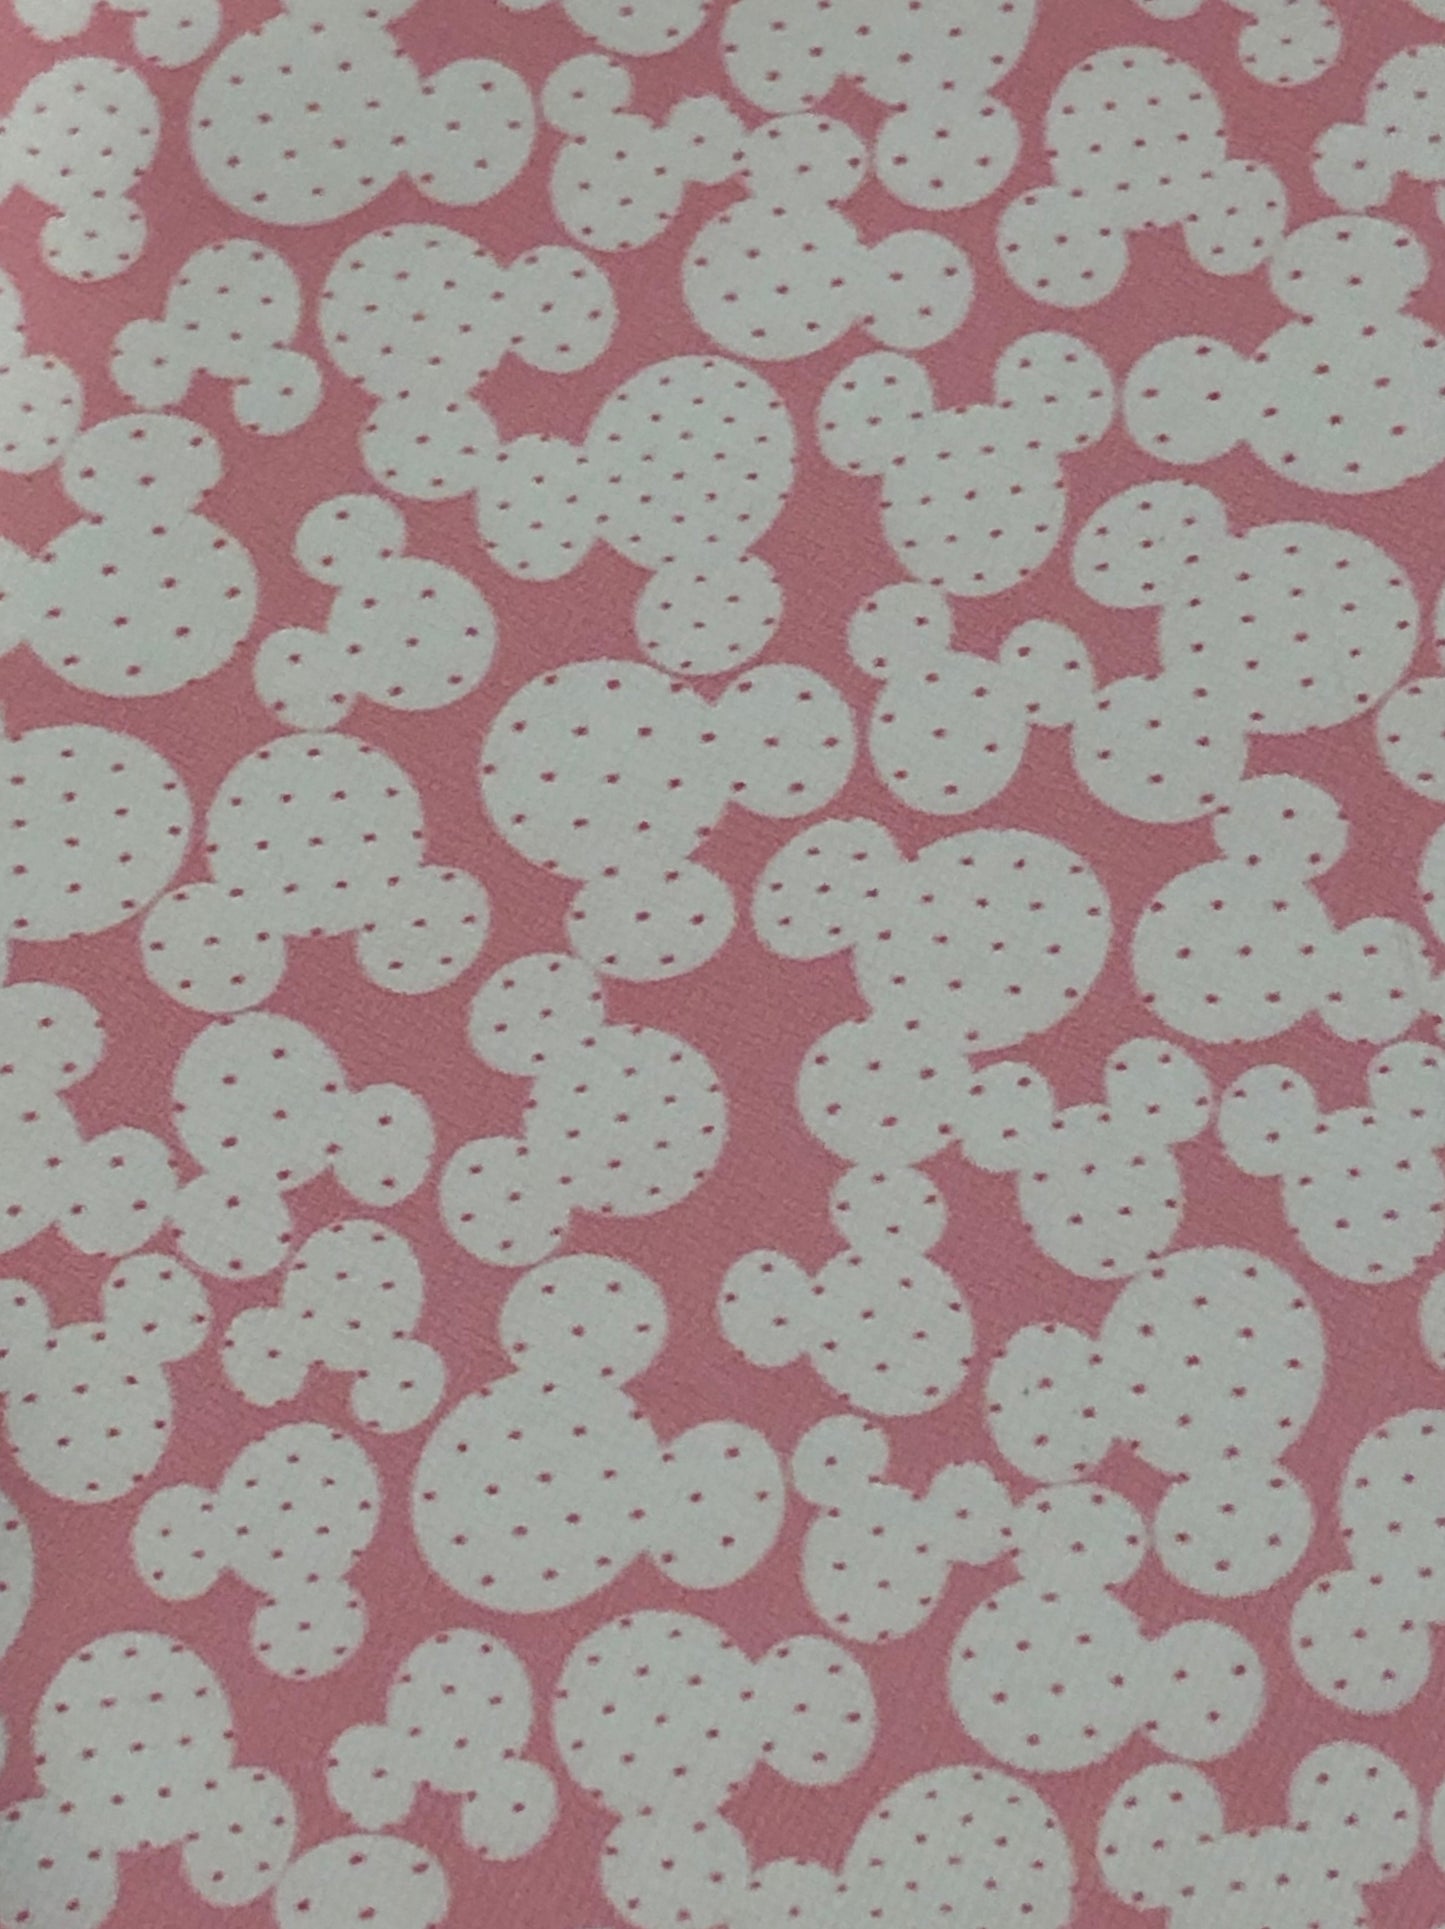 Faux Leather - pink polka dot mouse heads